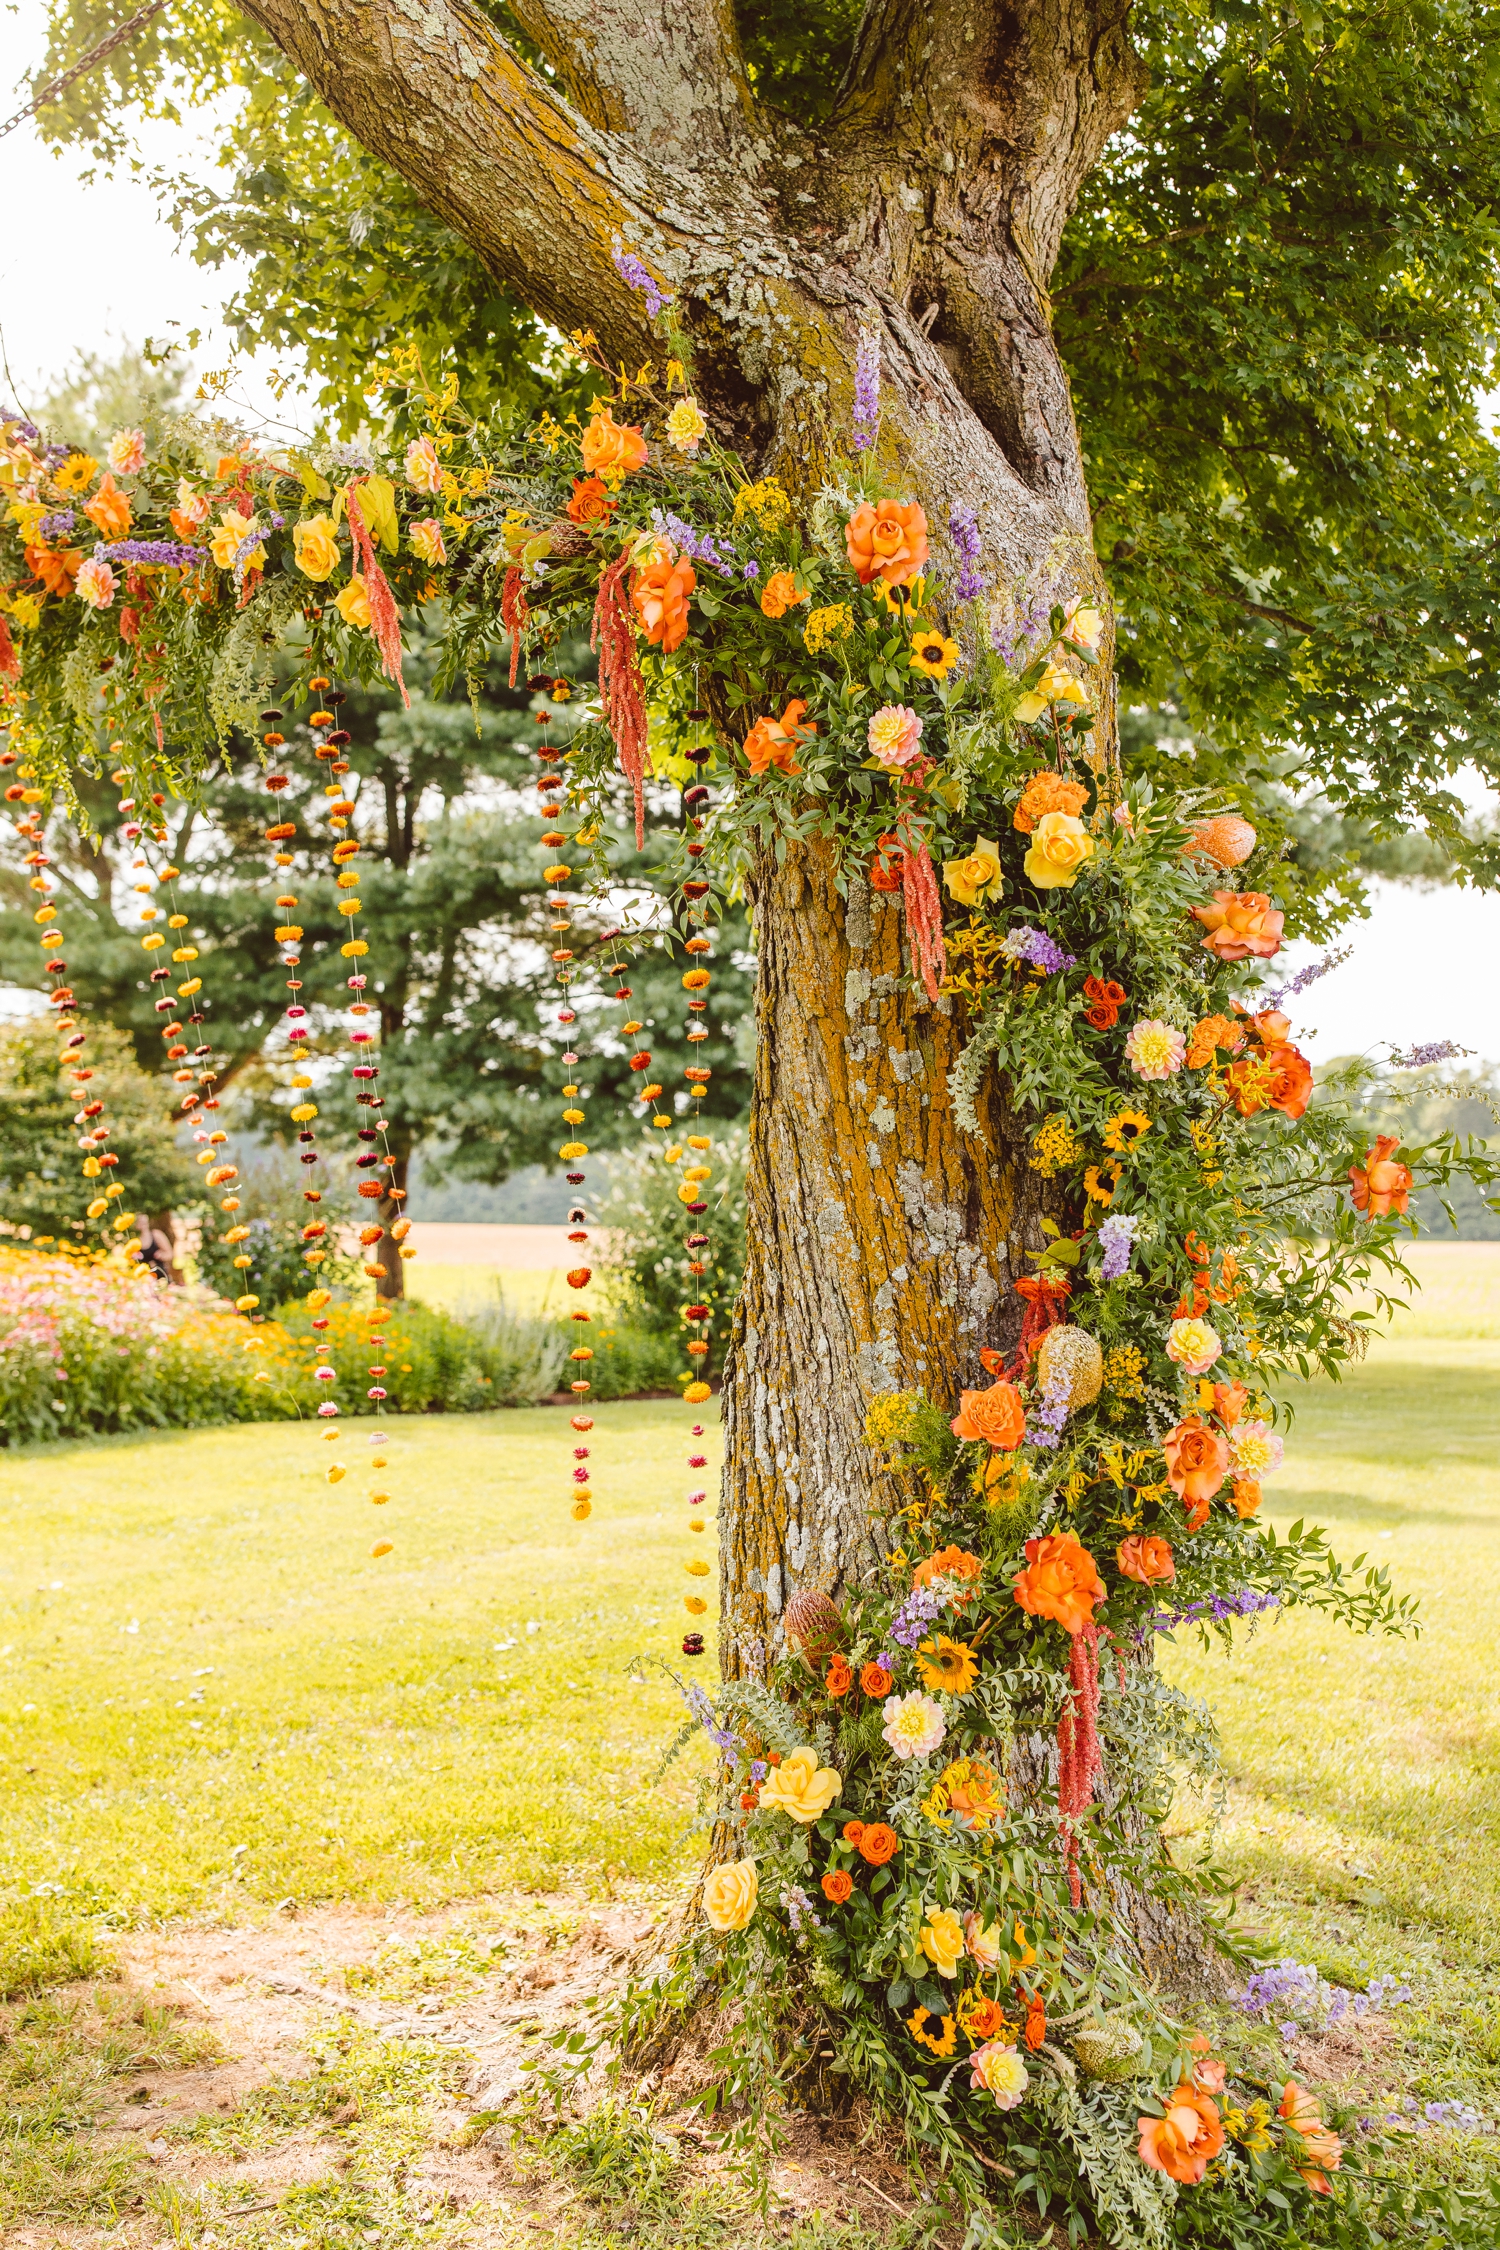 Boho floral installation on tree with hanging floral garland | Brooke Michelle Photography